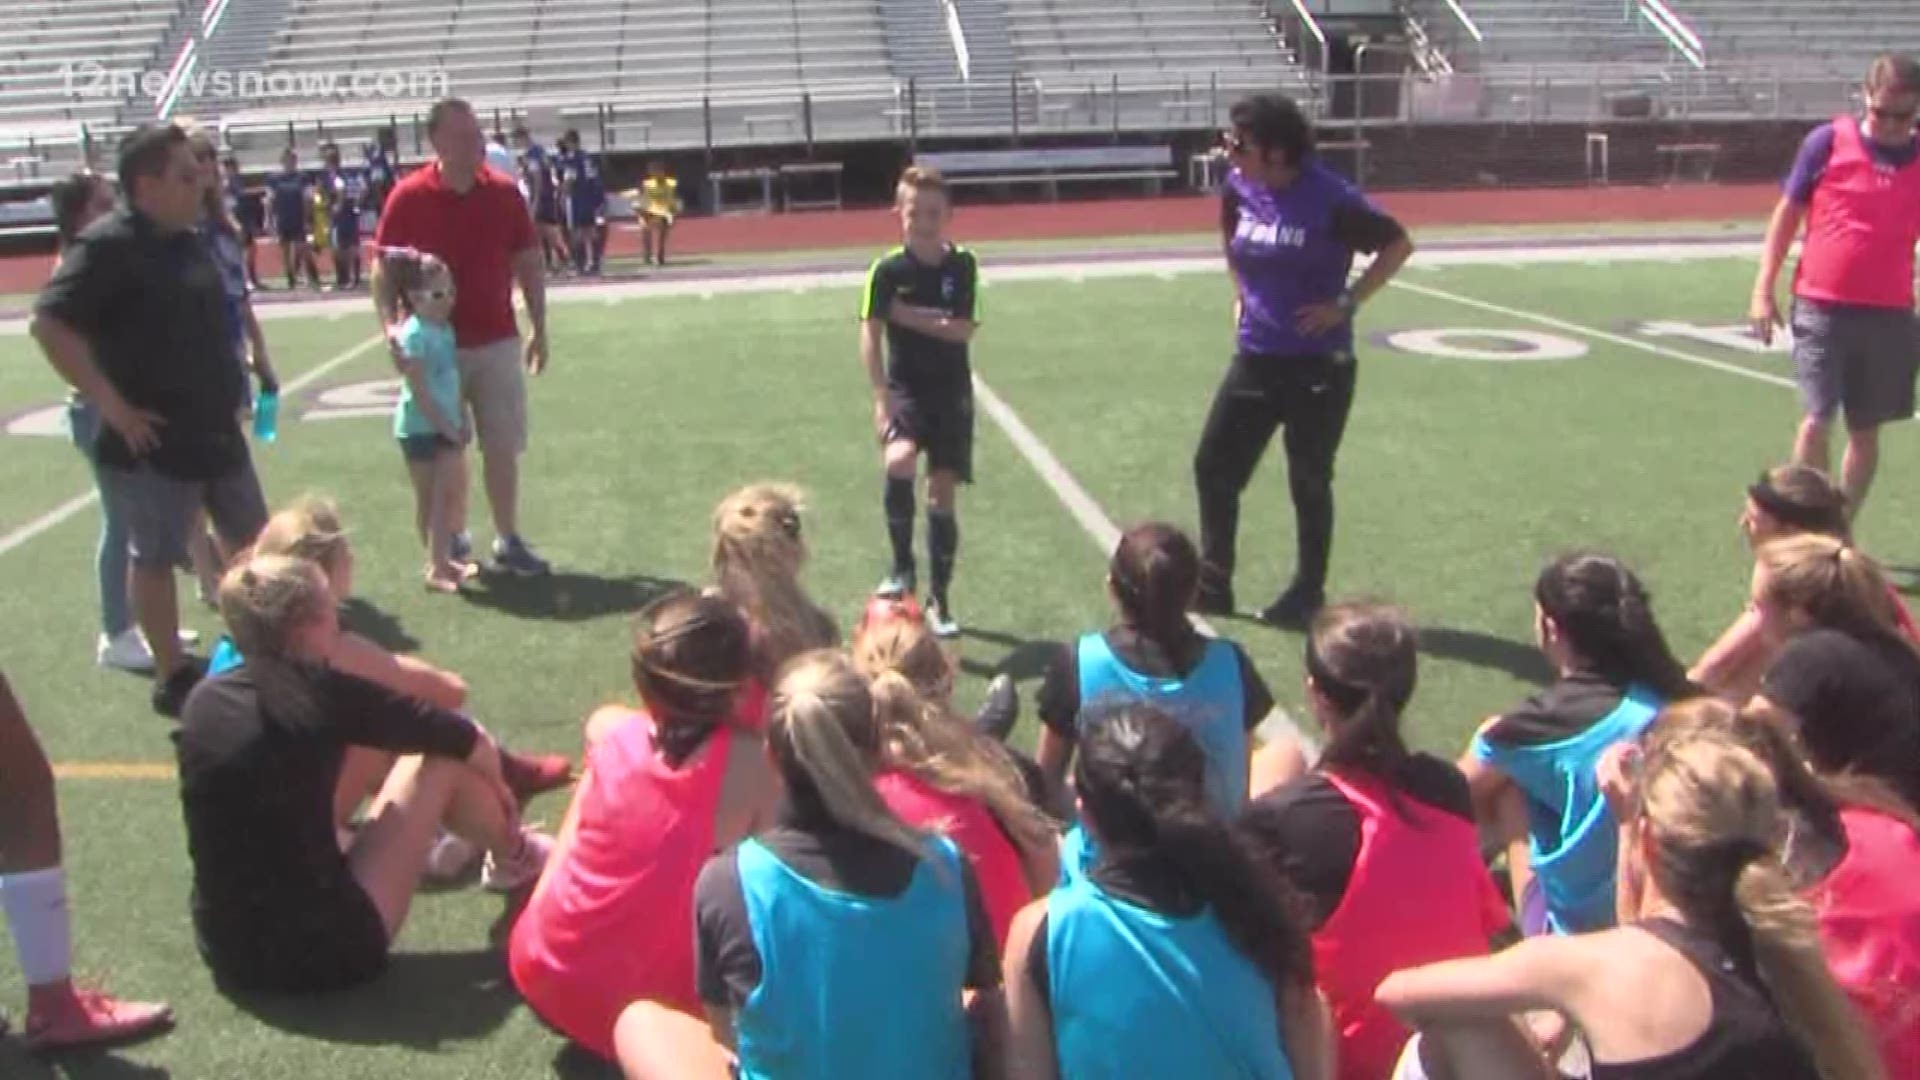 Joshua Hebert took time out of his busy schedule to meet the Port Neches-Groves girls soccer team and show off a few tricks on Wednesday.